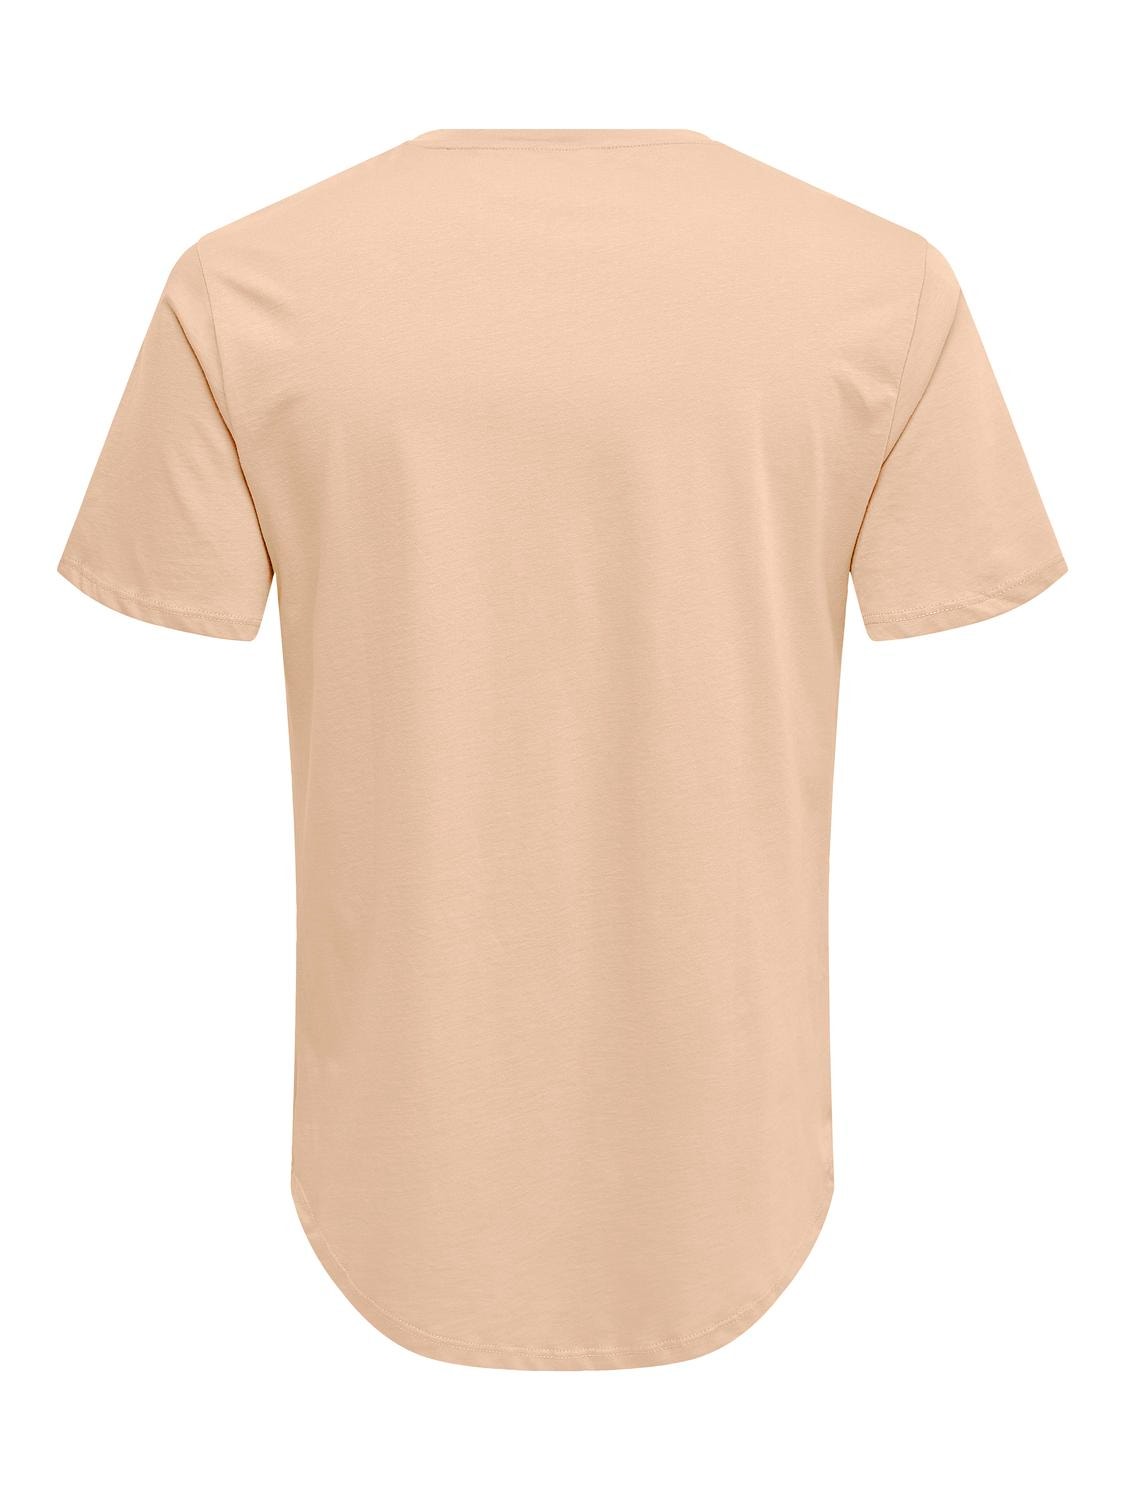 ONLY & SONS Long Line Fit O-hals T-skjorte -Peach Nectar - 22002973